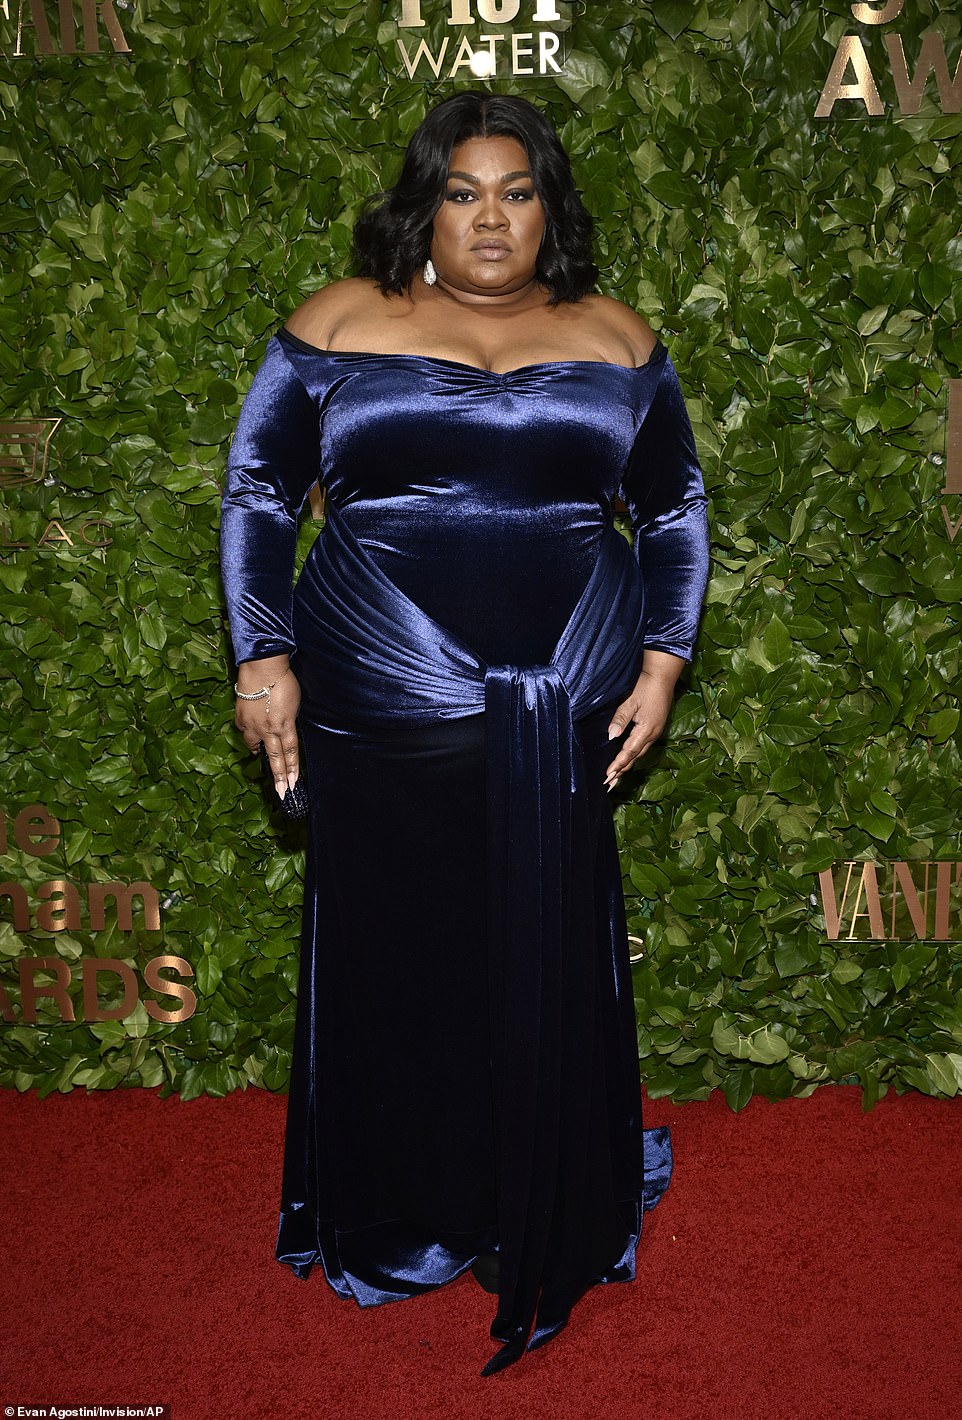 Glamorous: Broadway star, Da'vine Joy Randolph looked absolutely stunning in a blue velvet gown and her hair in loose waves